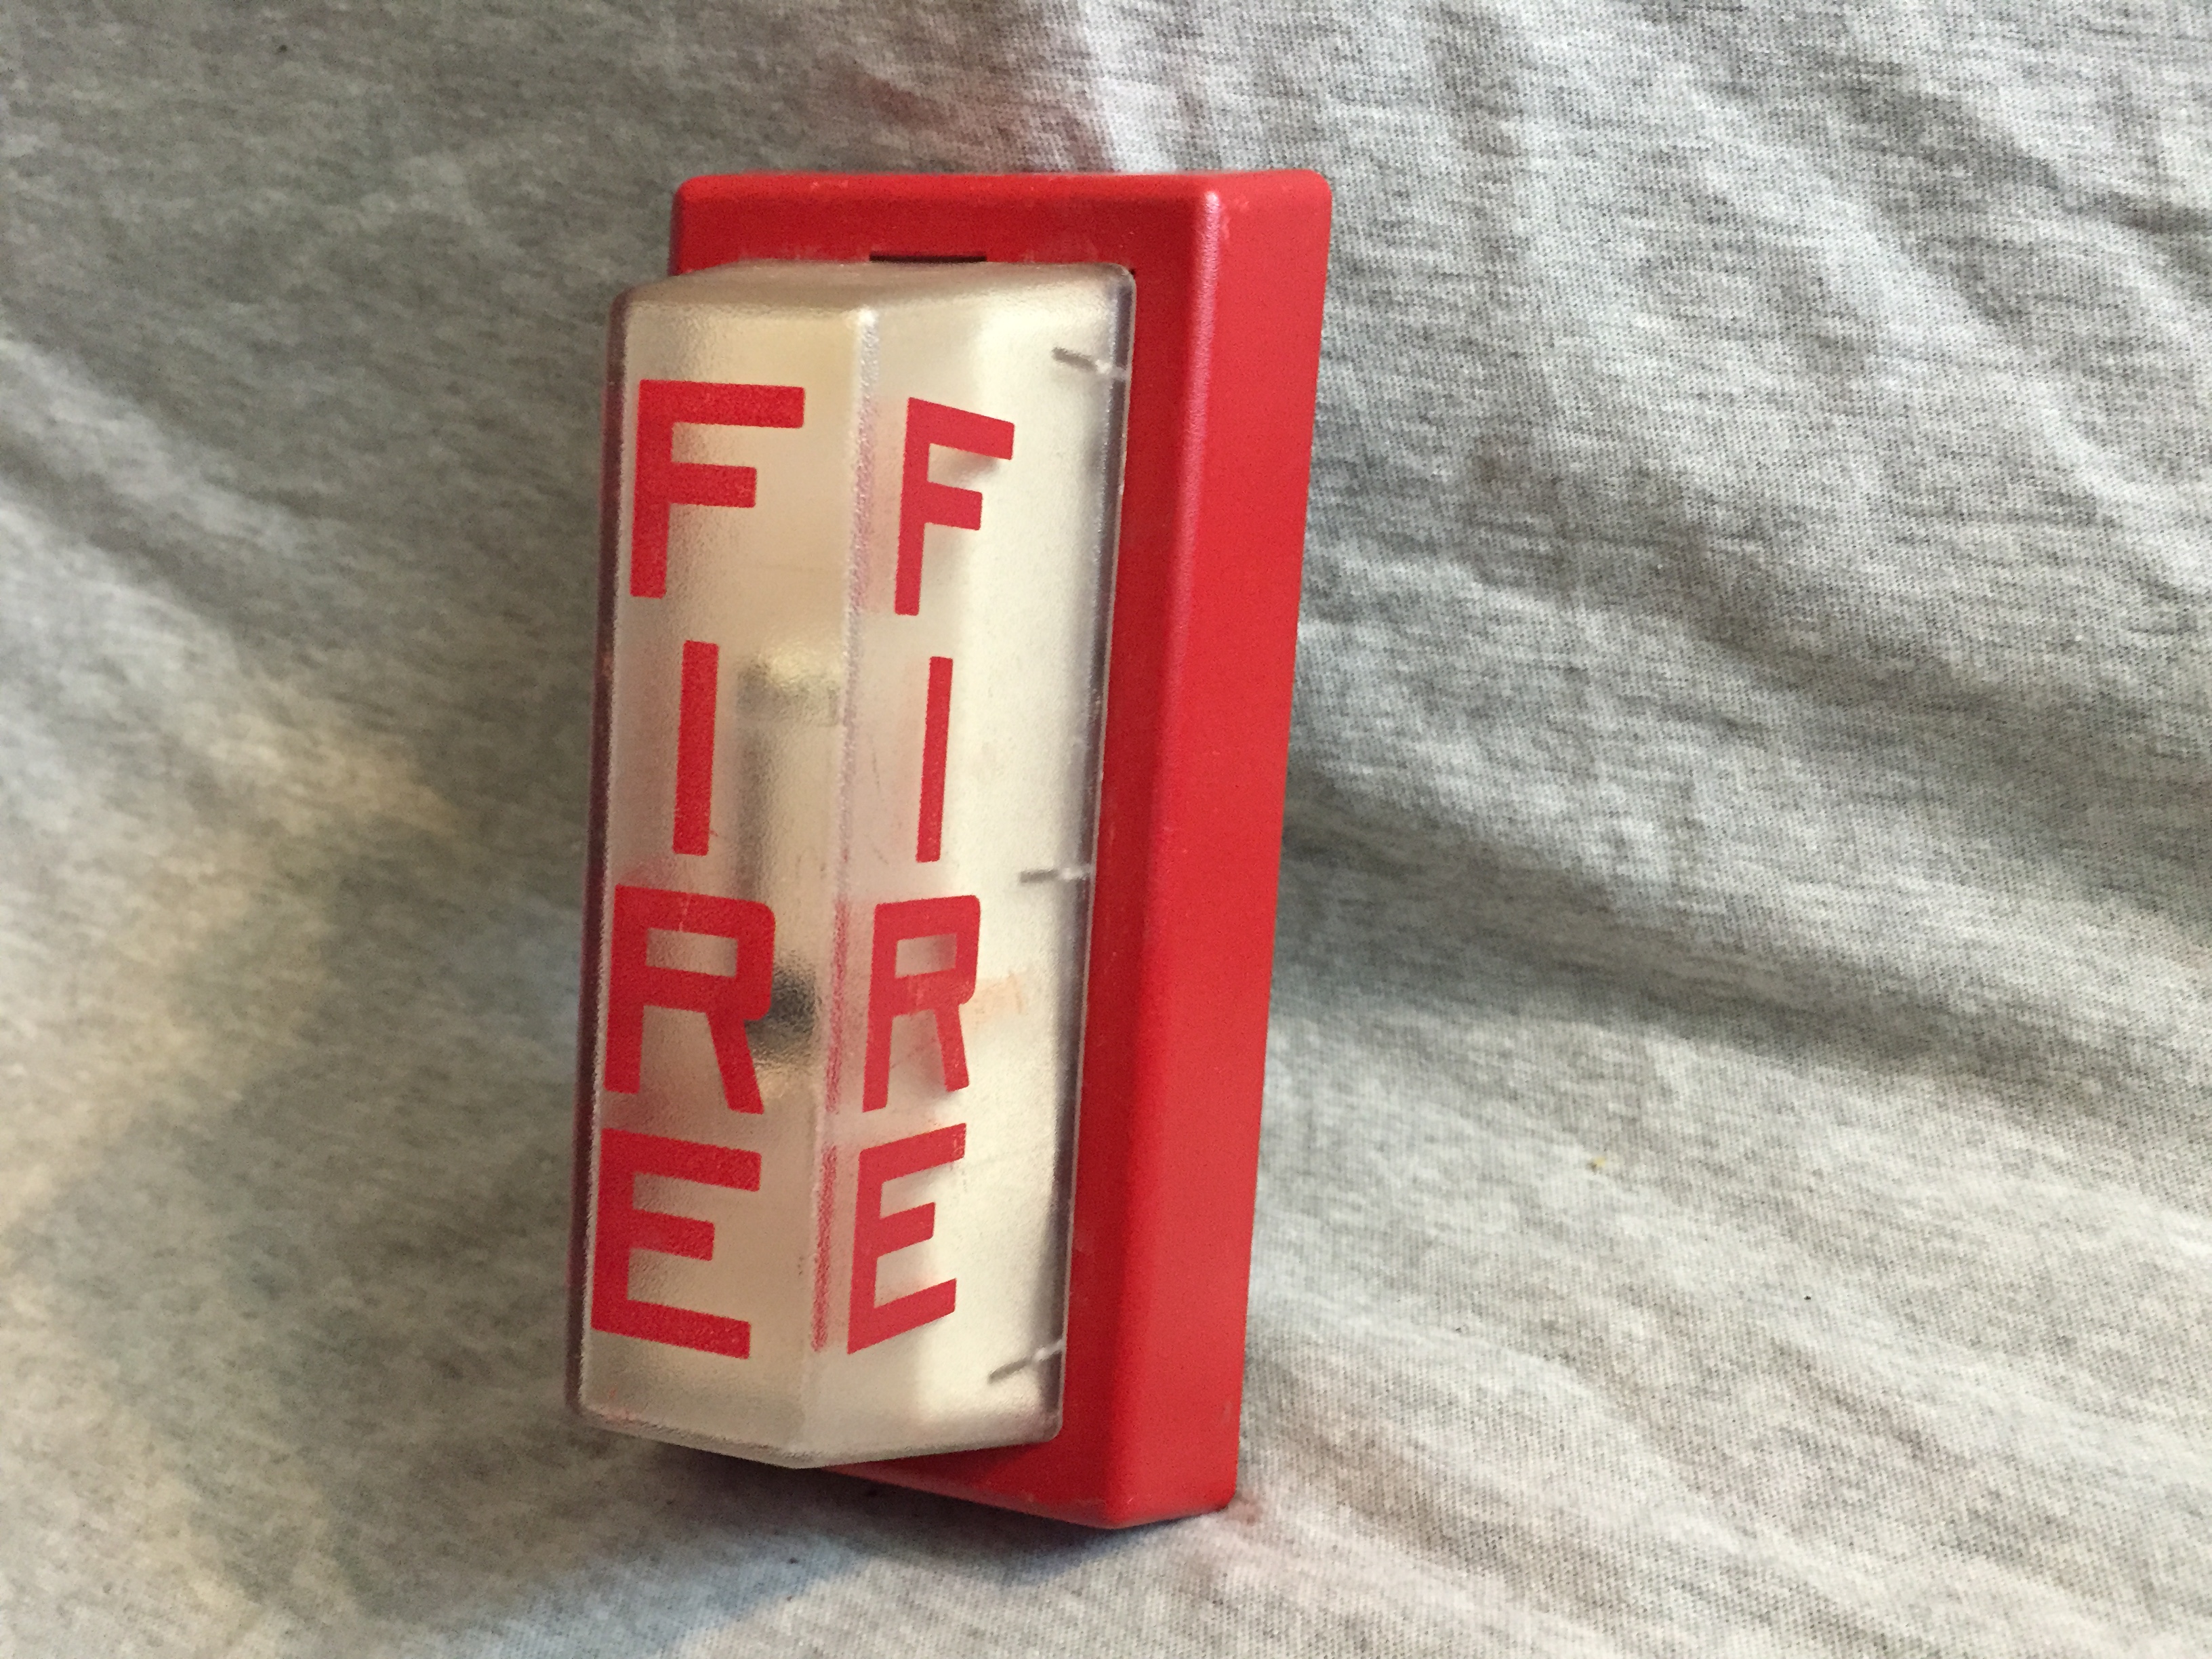 Simplex 4904-9101 - Fire Alarm Collection, Information, Pictures, and ...